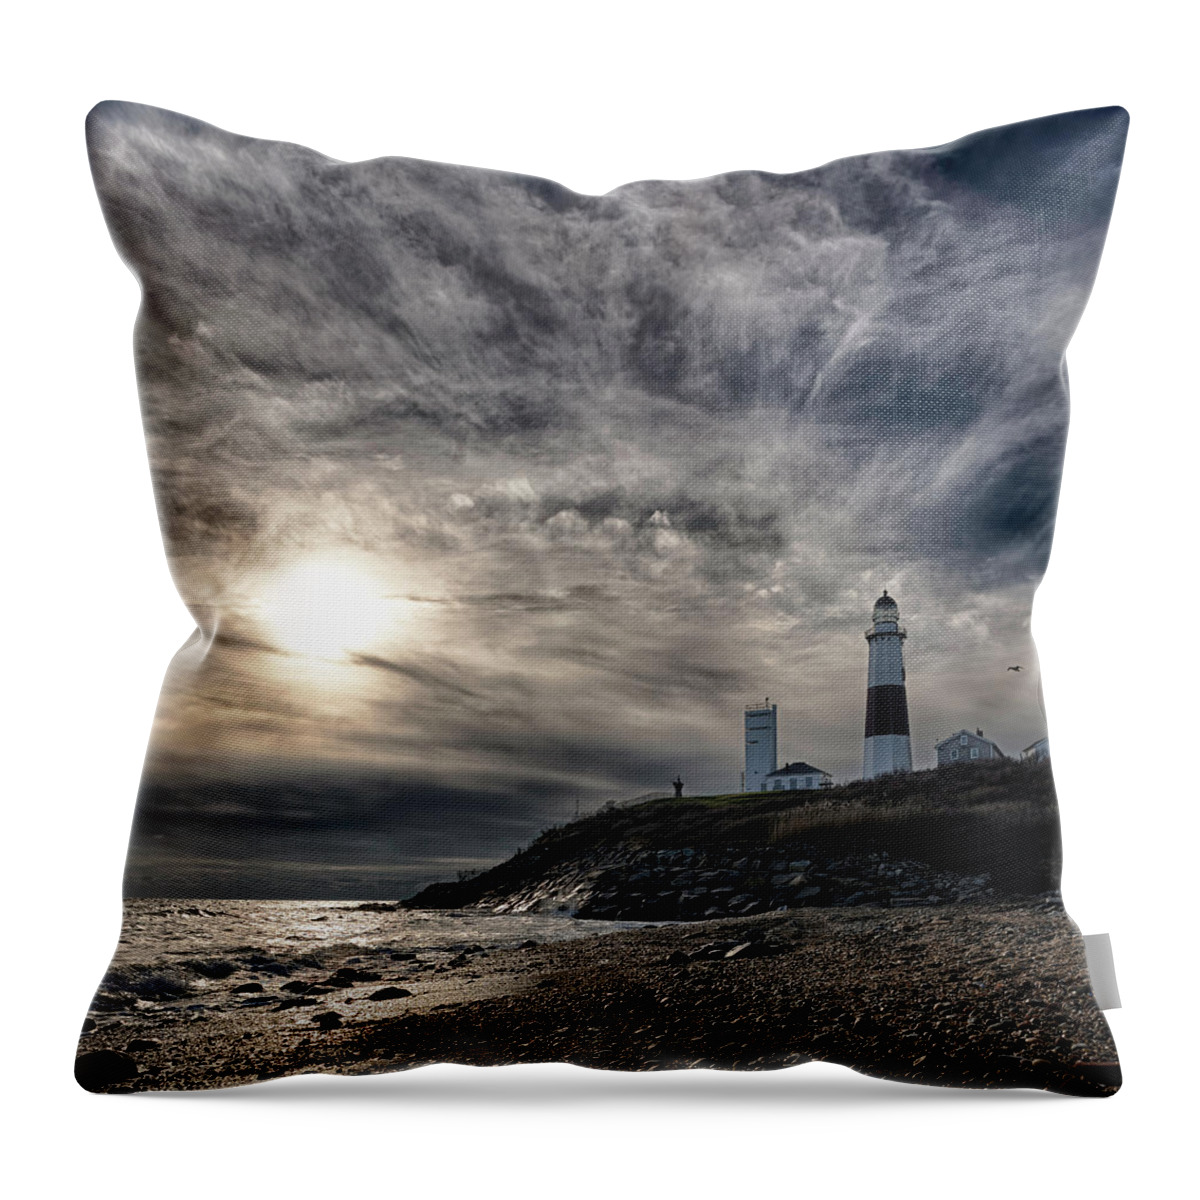 Dawn Throw Pillow featuring the photograph Lighthouse At Montauk Point, Long #1 by Alex Potemkin